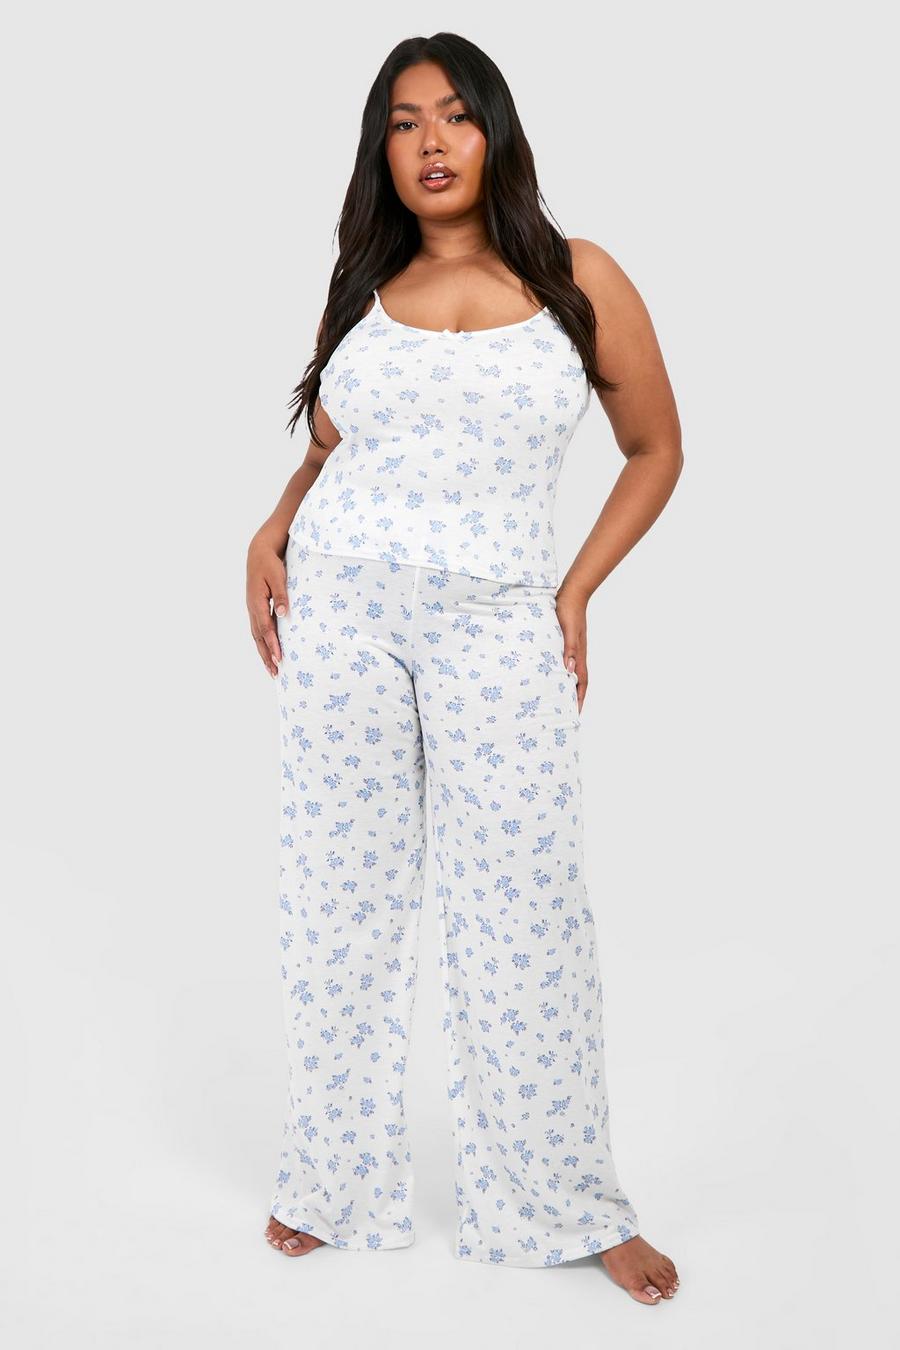 10 Cute Plus Size Pajama Sets Perfect For The Holidays - My Curves And  Curls